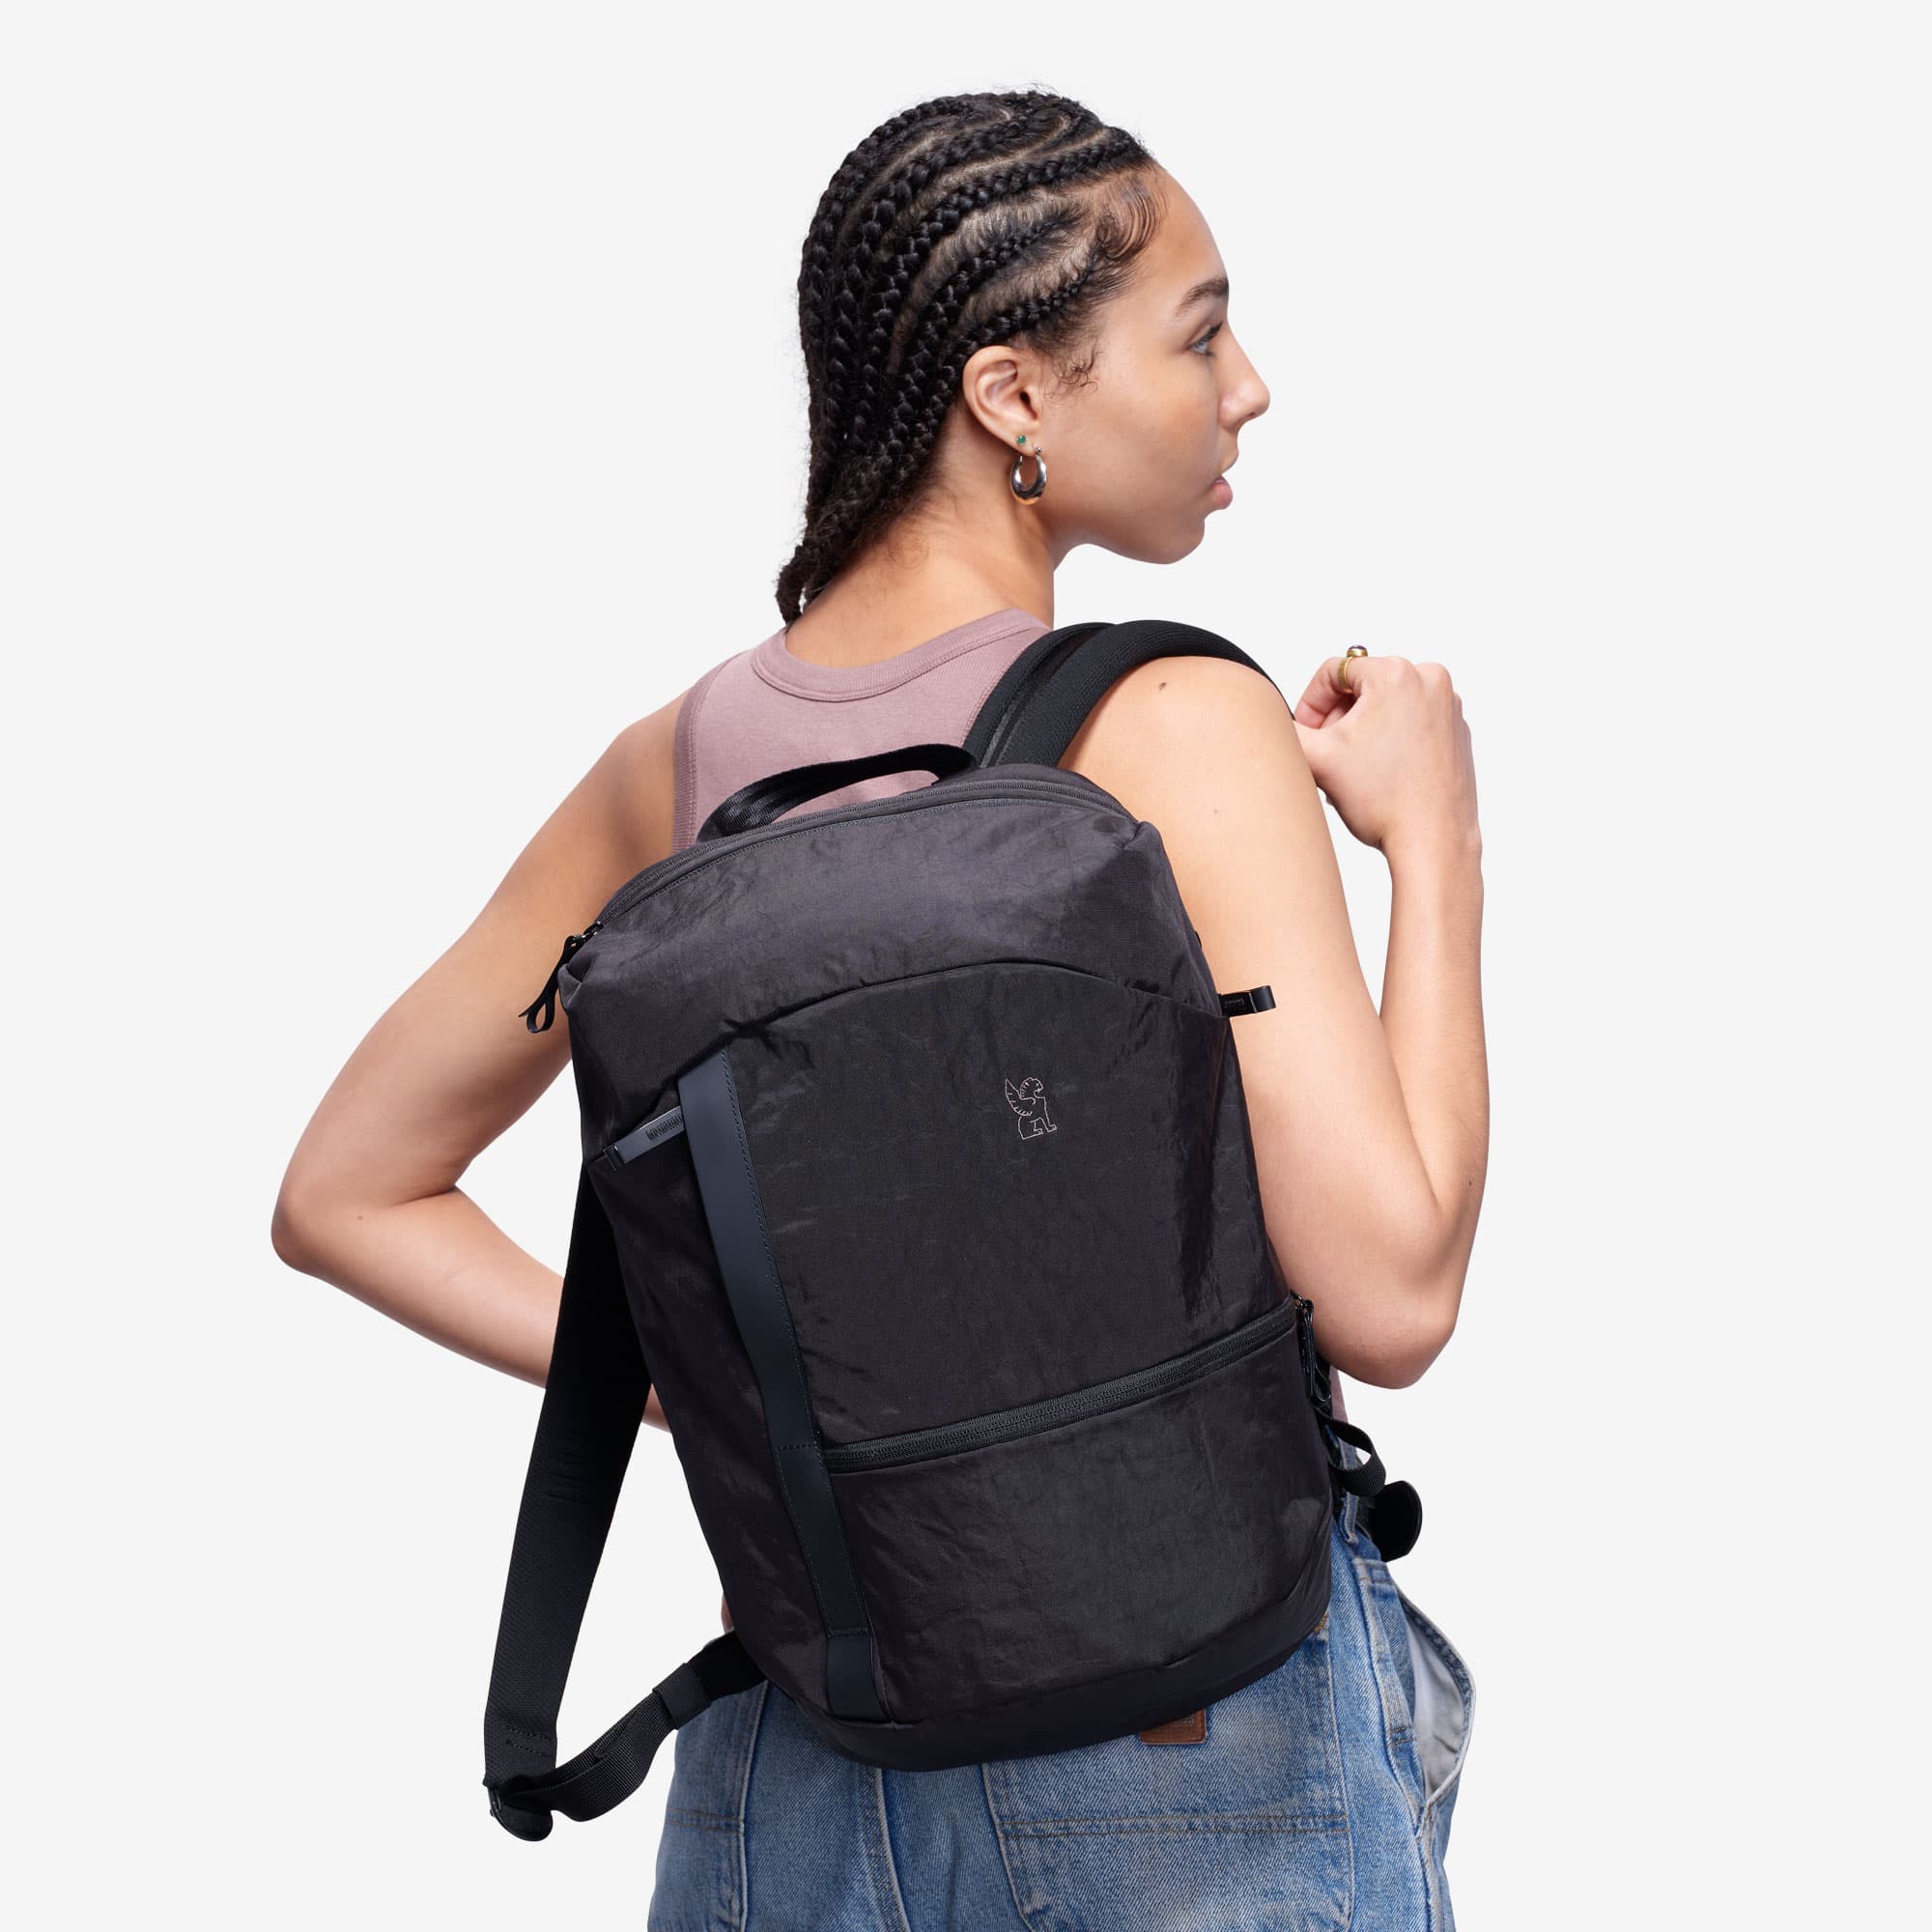 Camden backpack in black on a woman back view